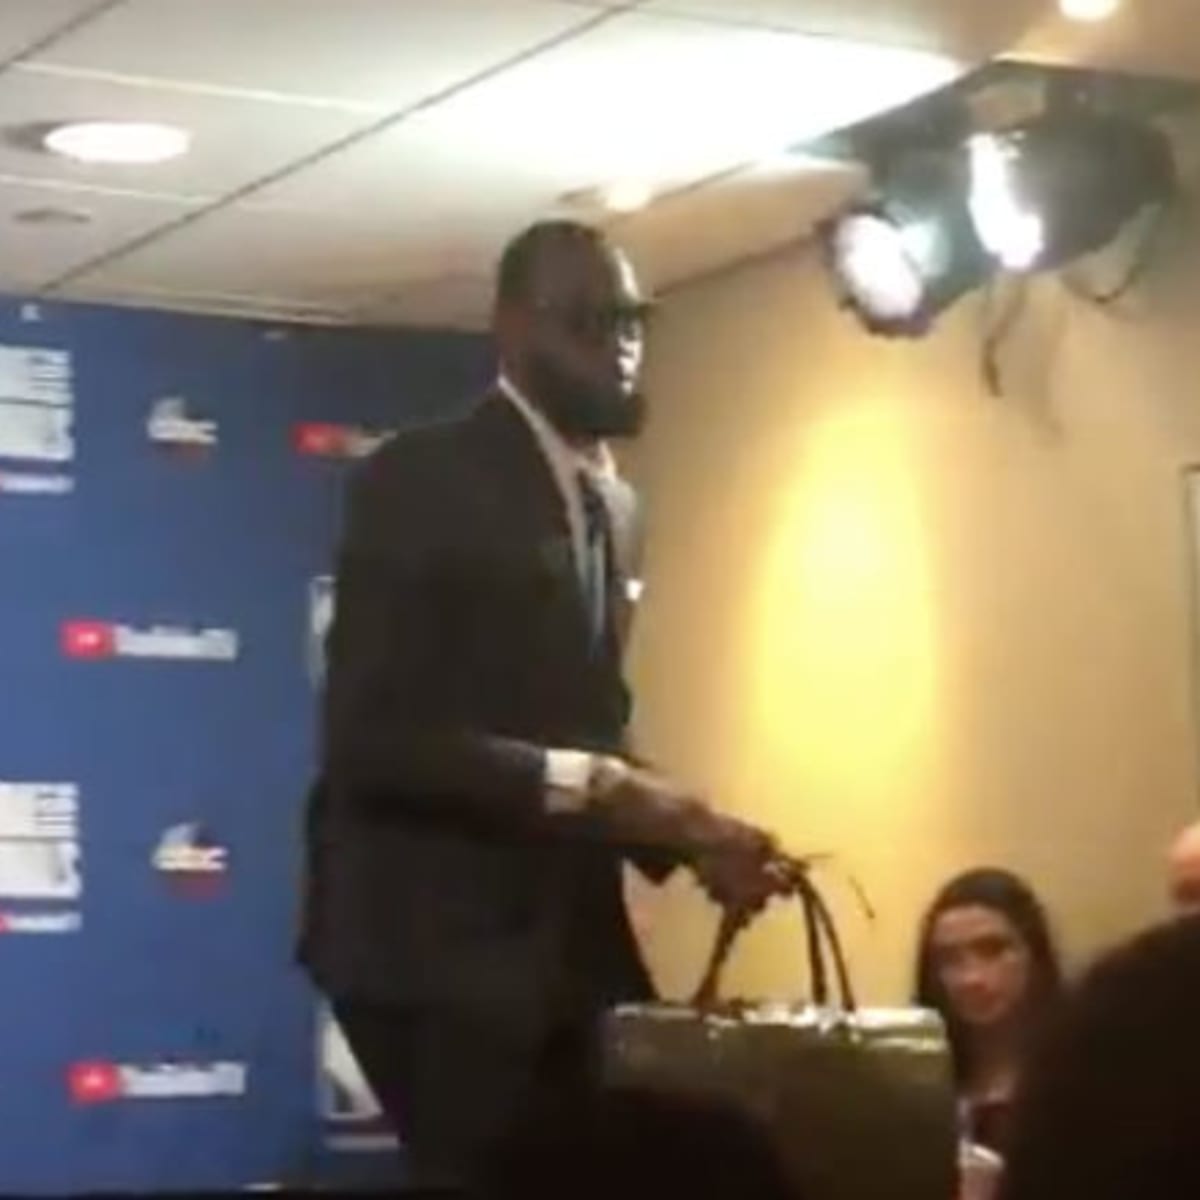 The moment LeBron James coolly walks out of press conference 